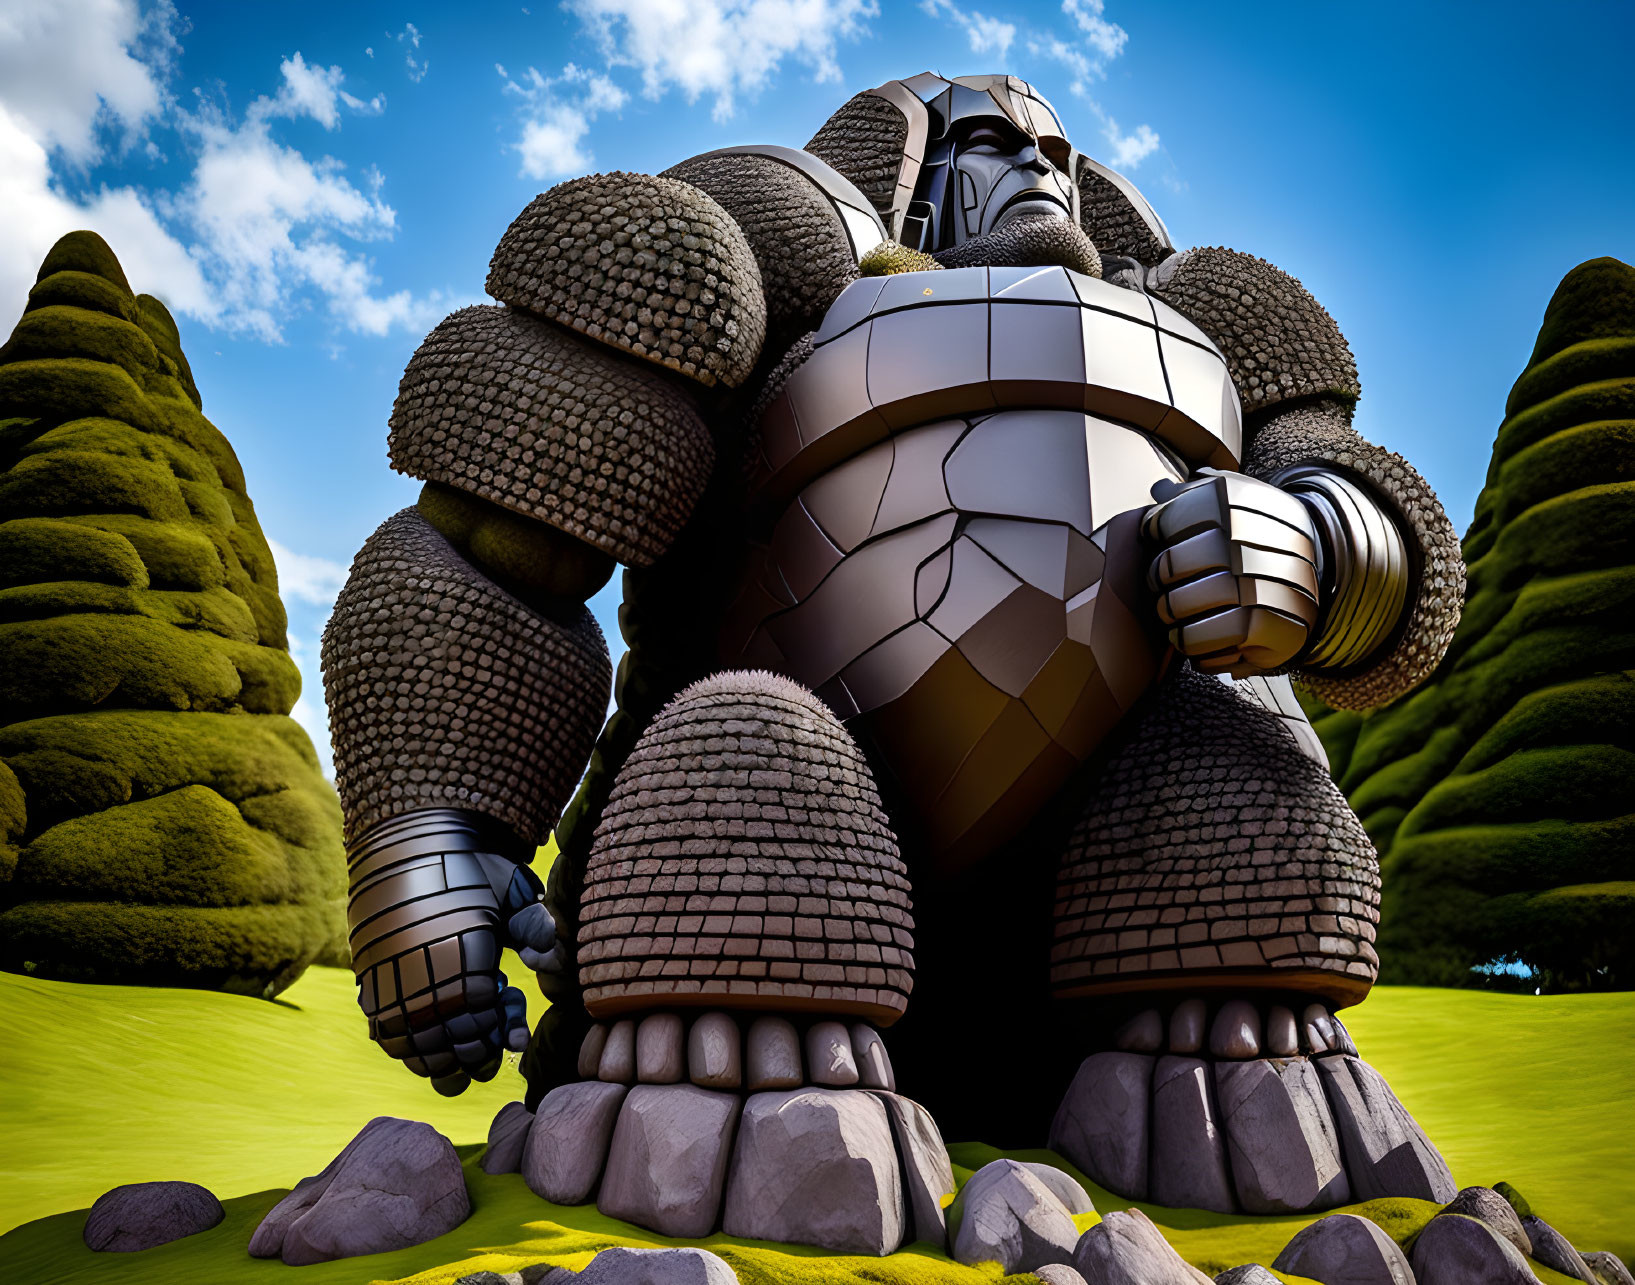 Gigantic Stone-Like Robot in Grass Field with Green Hills